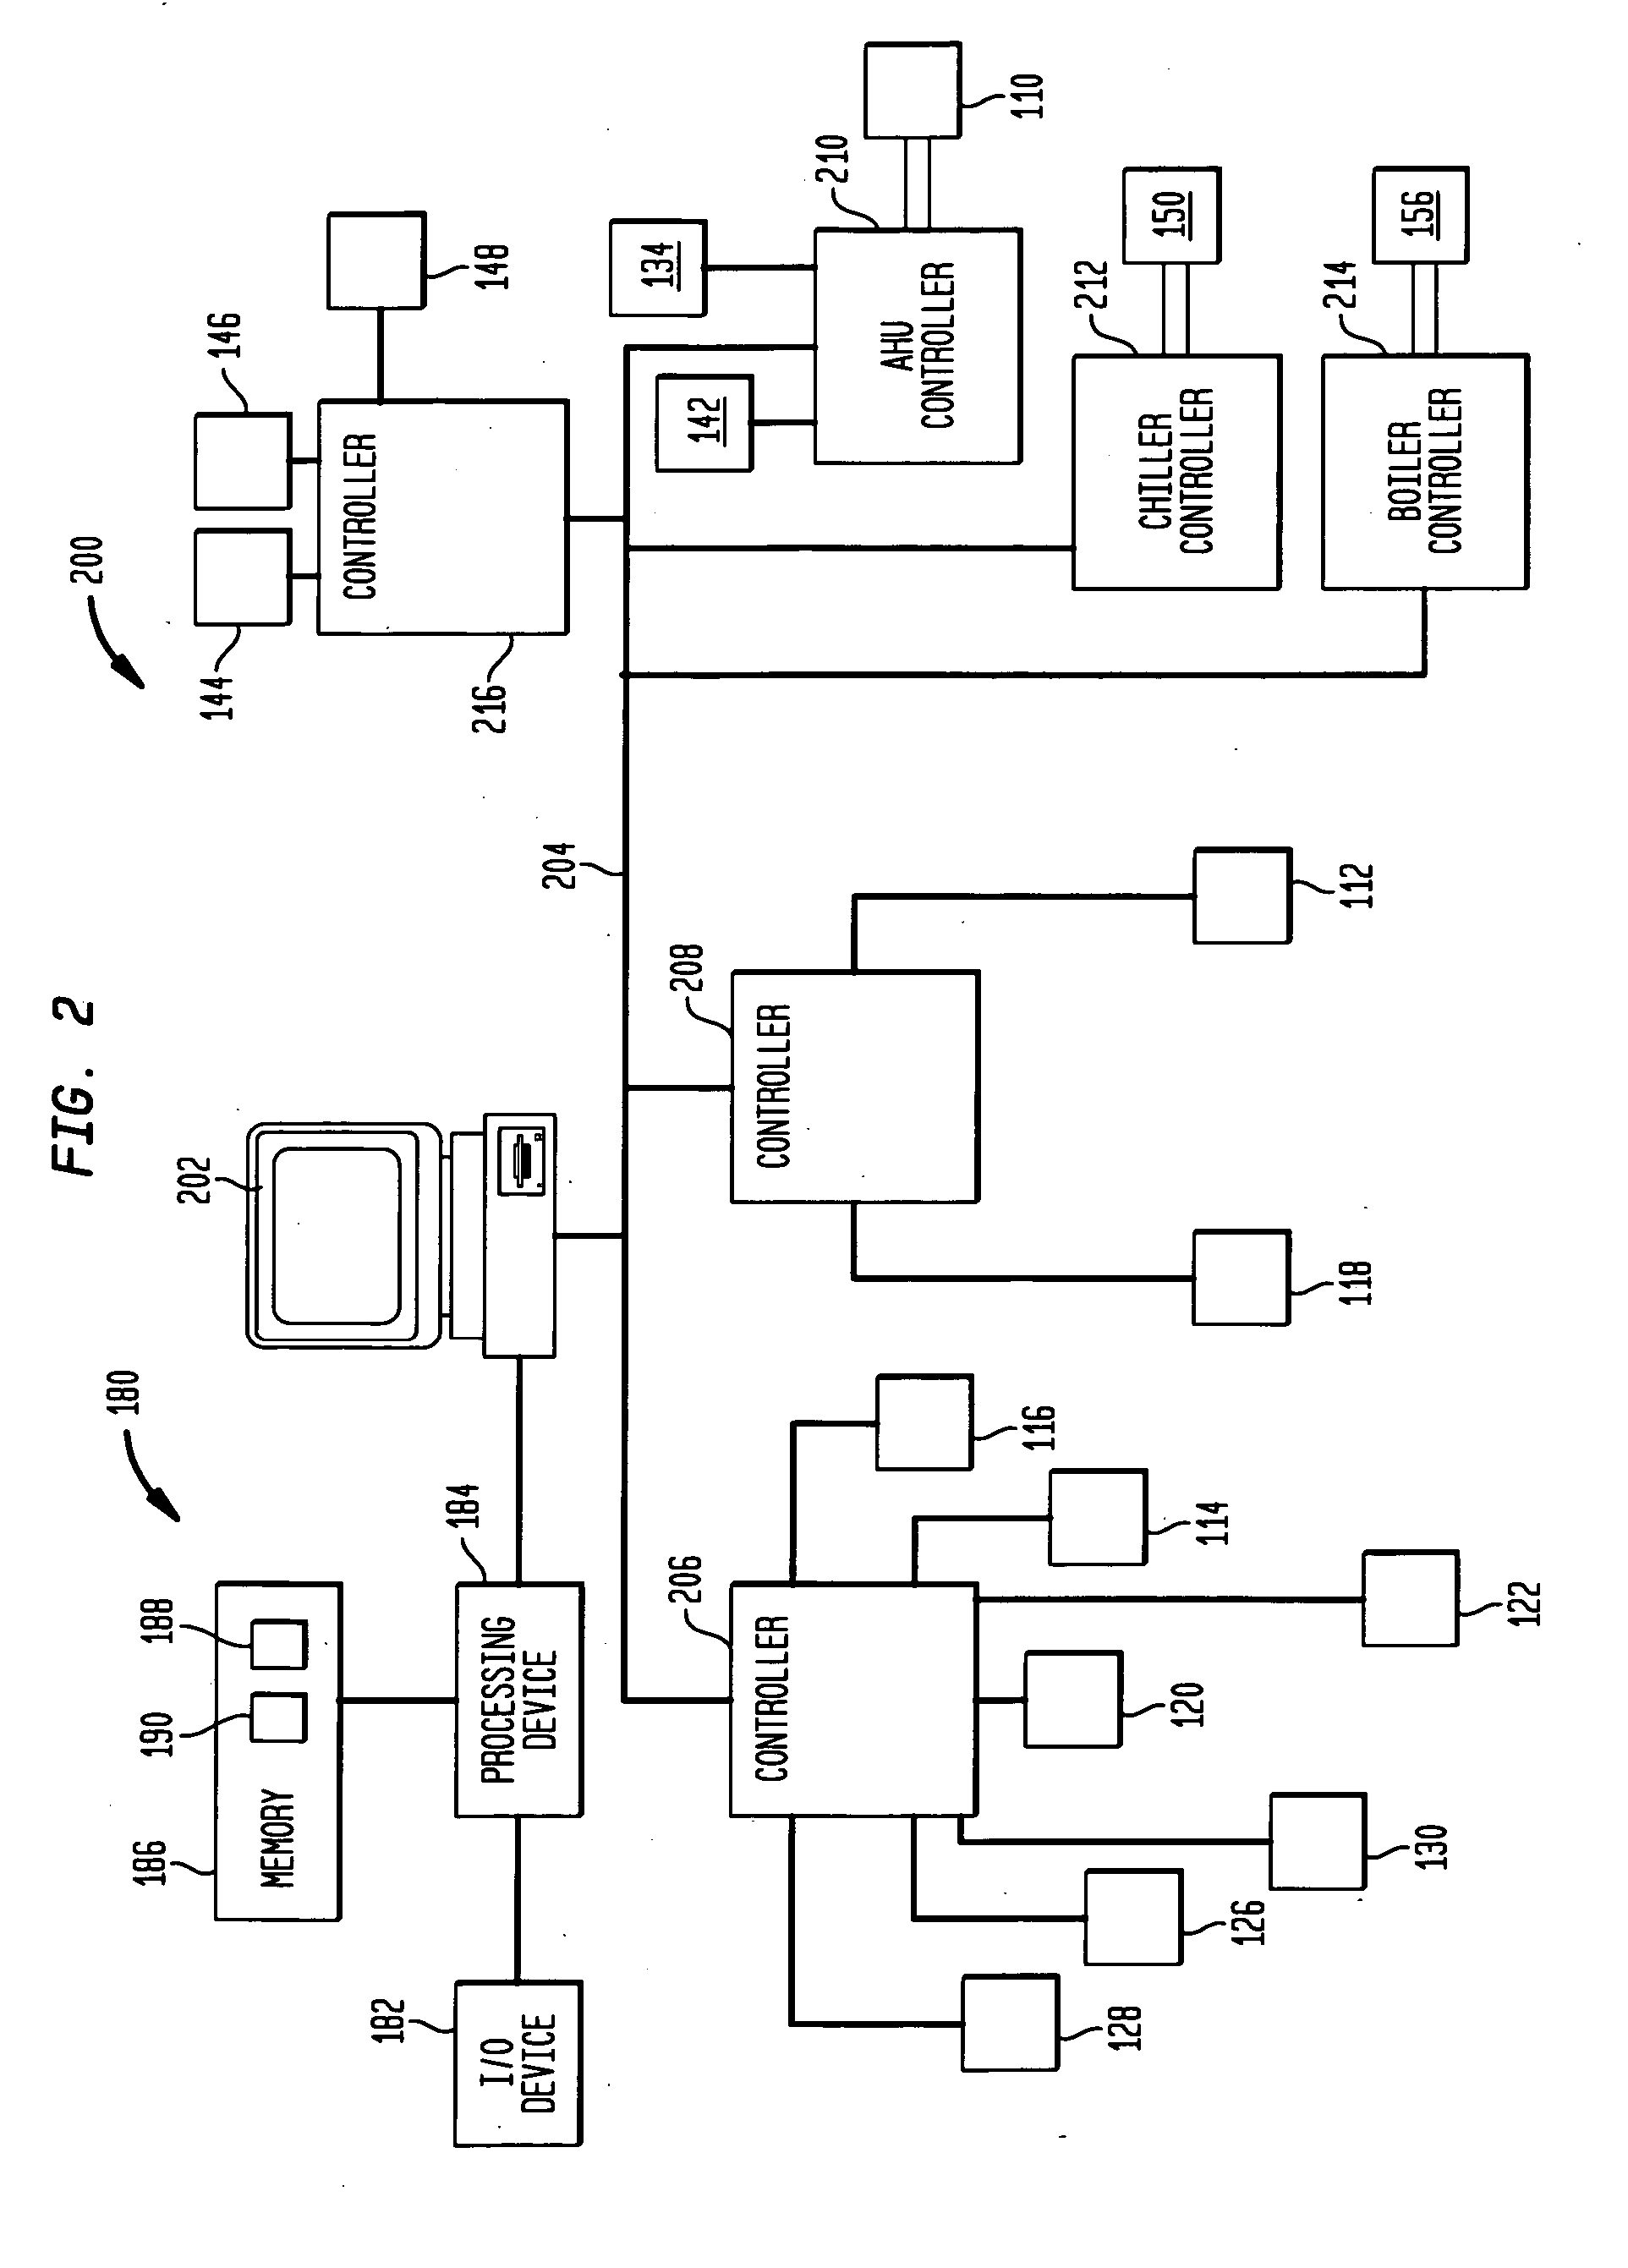 Method and apparatus for representing a building system